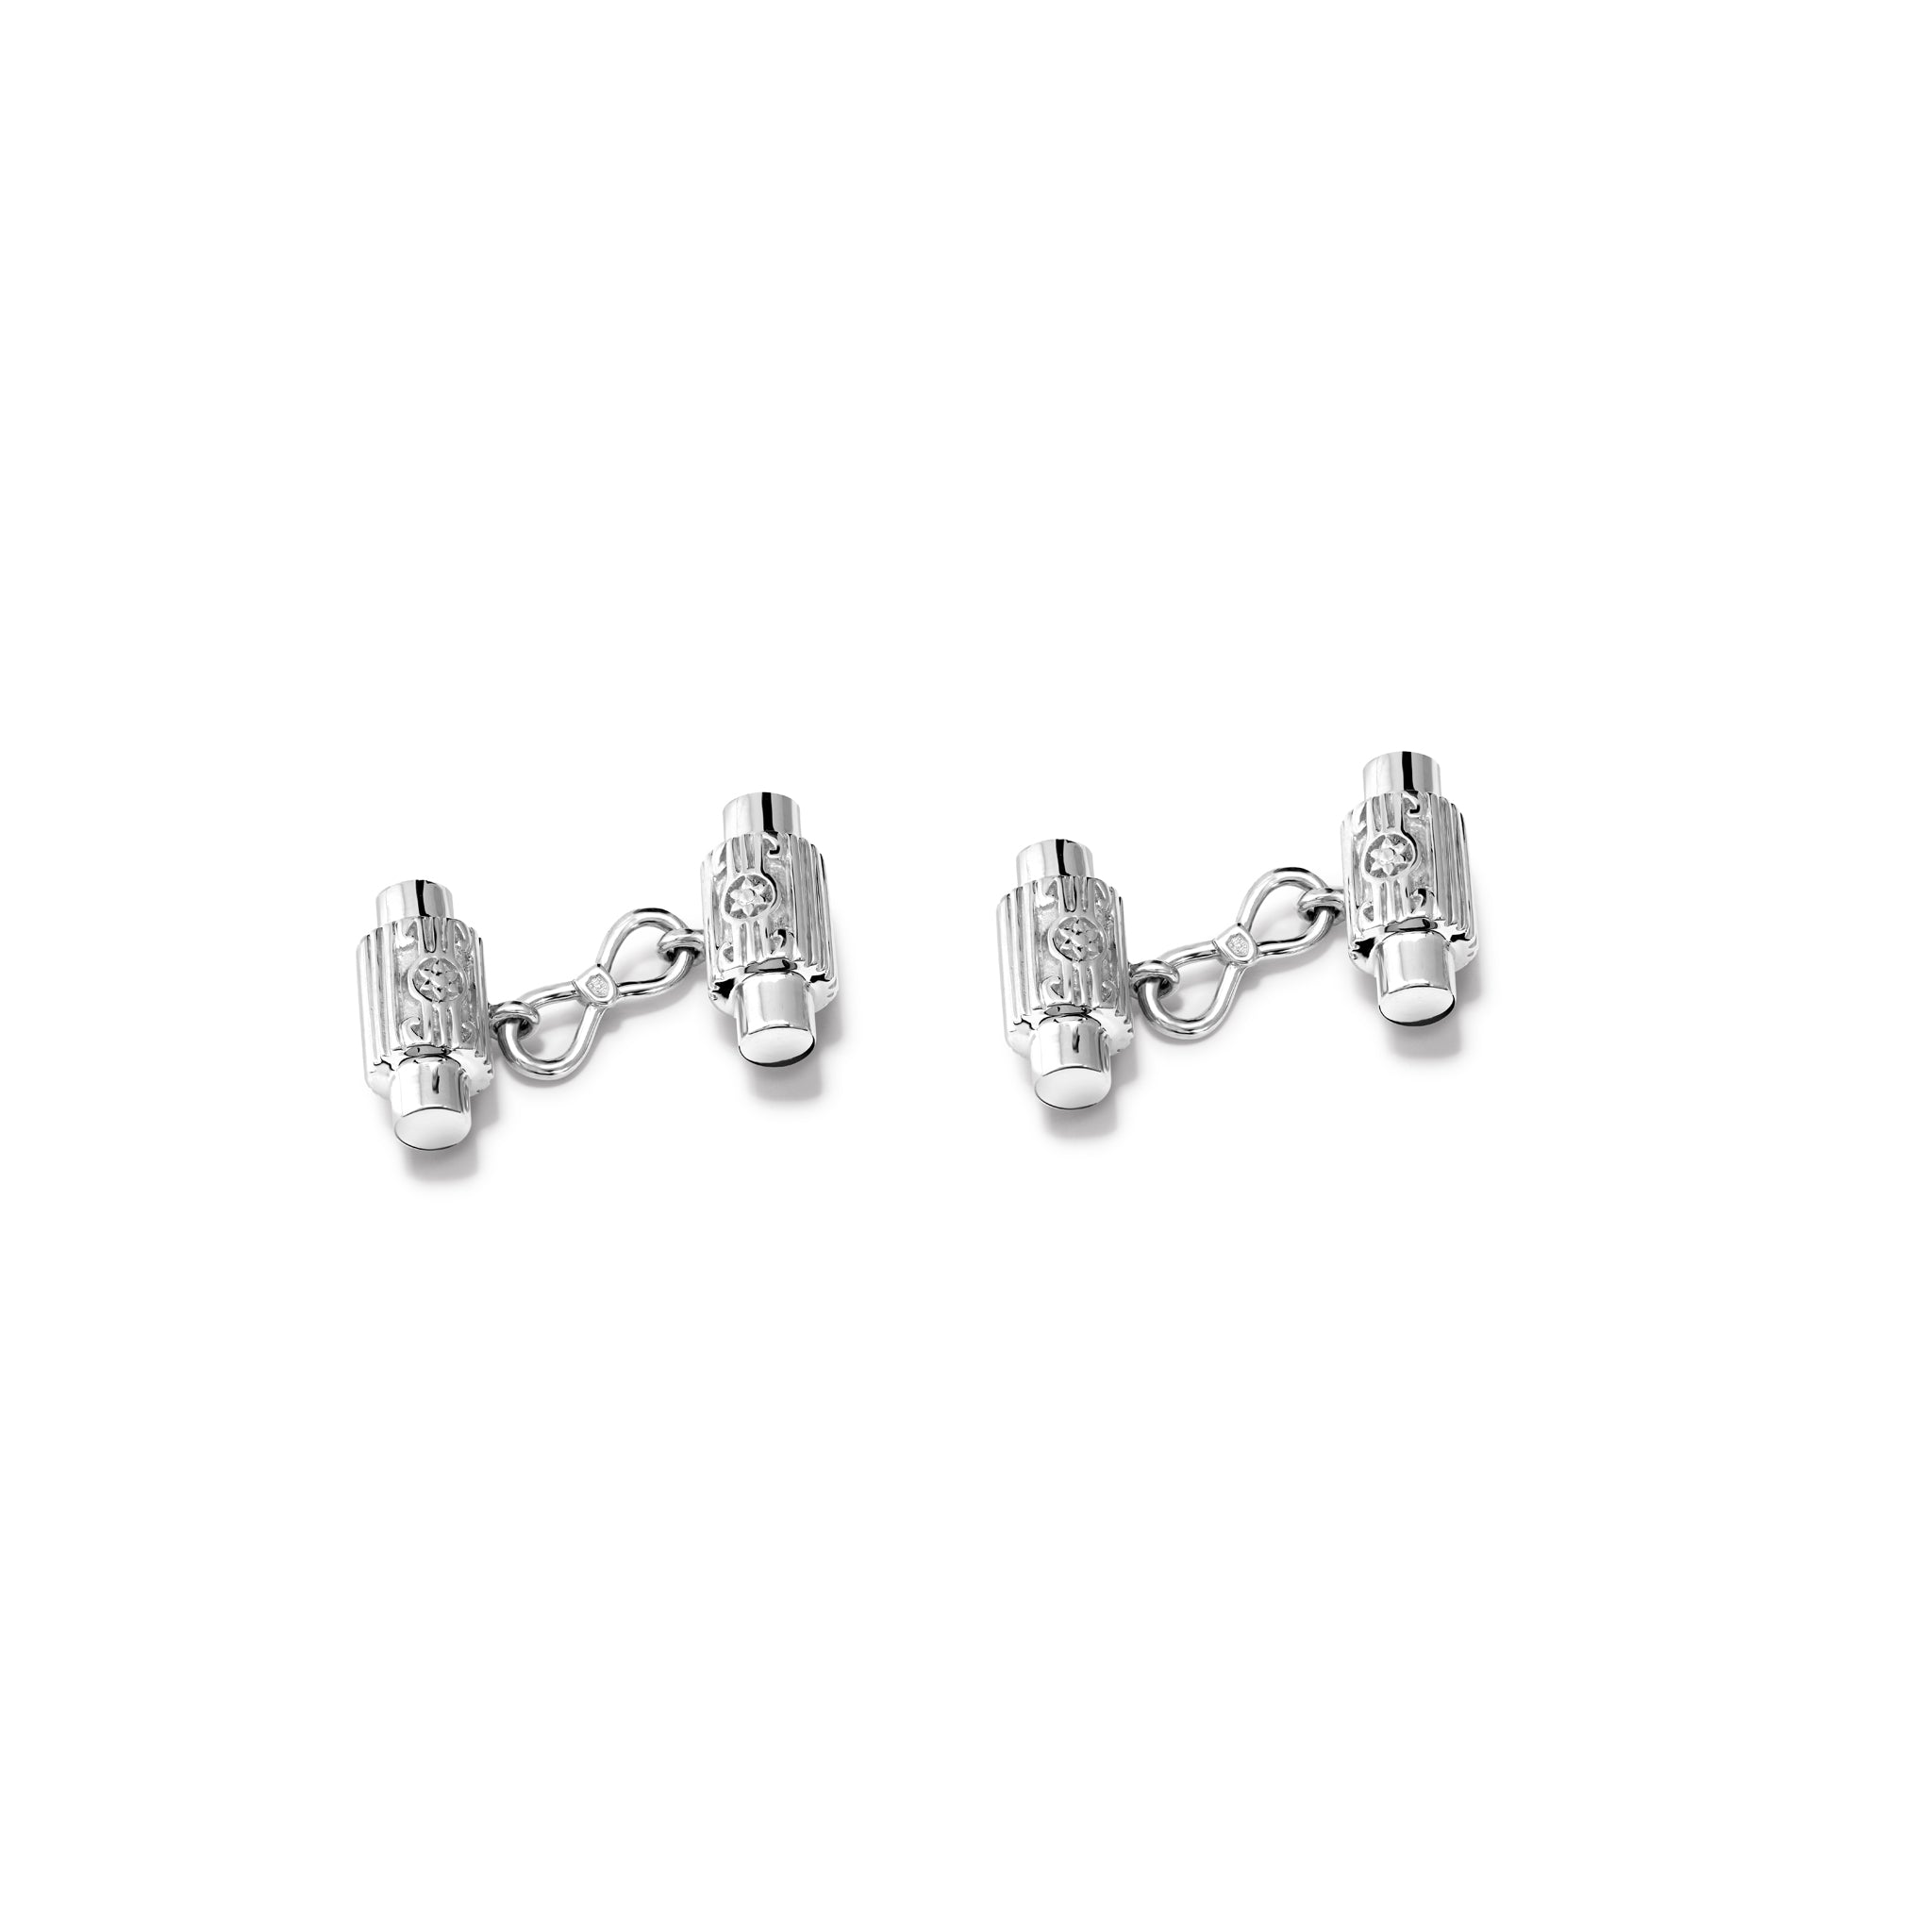 Teatro Massimo Double Ended Cufflinks Silver